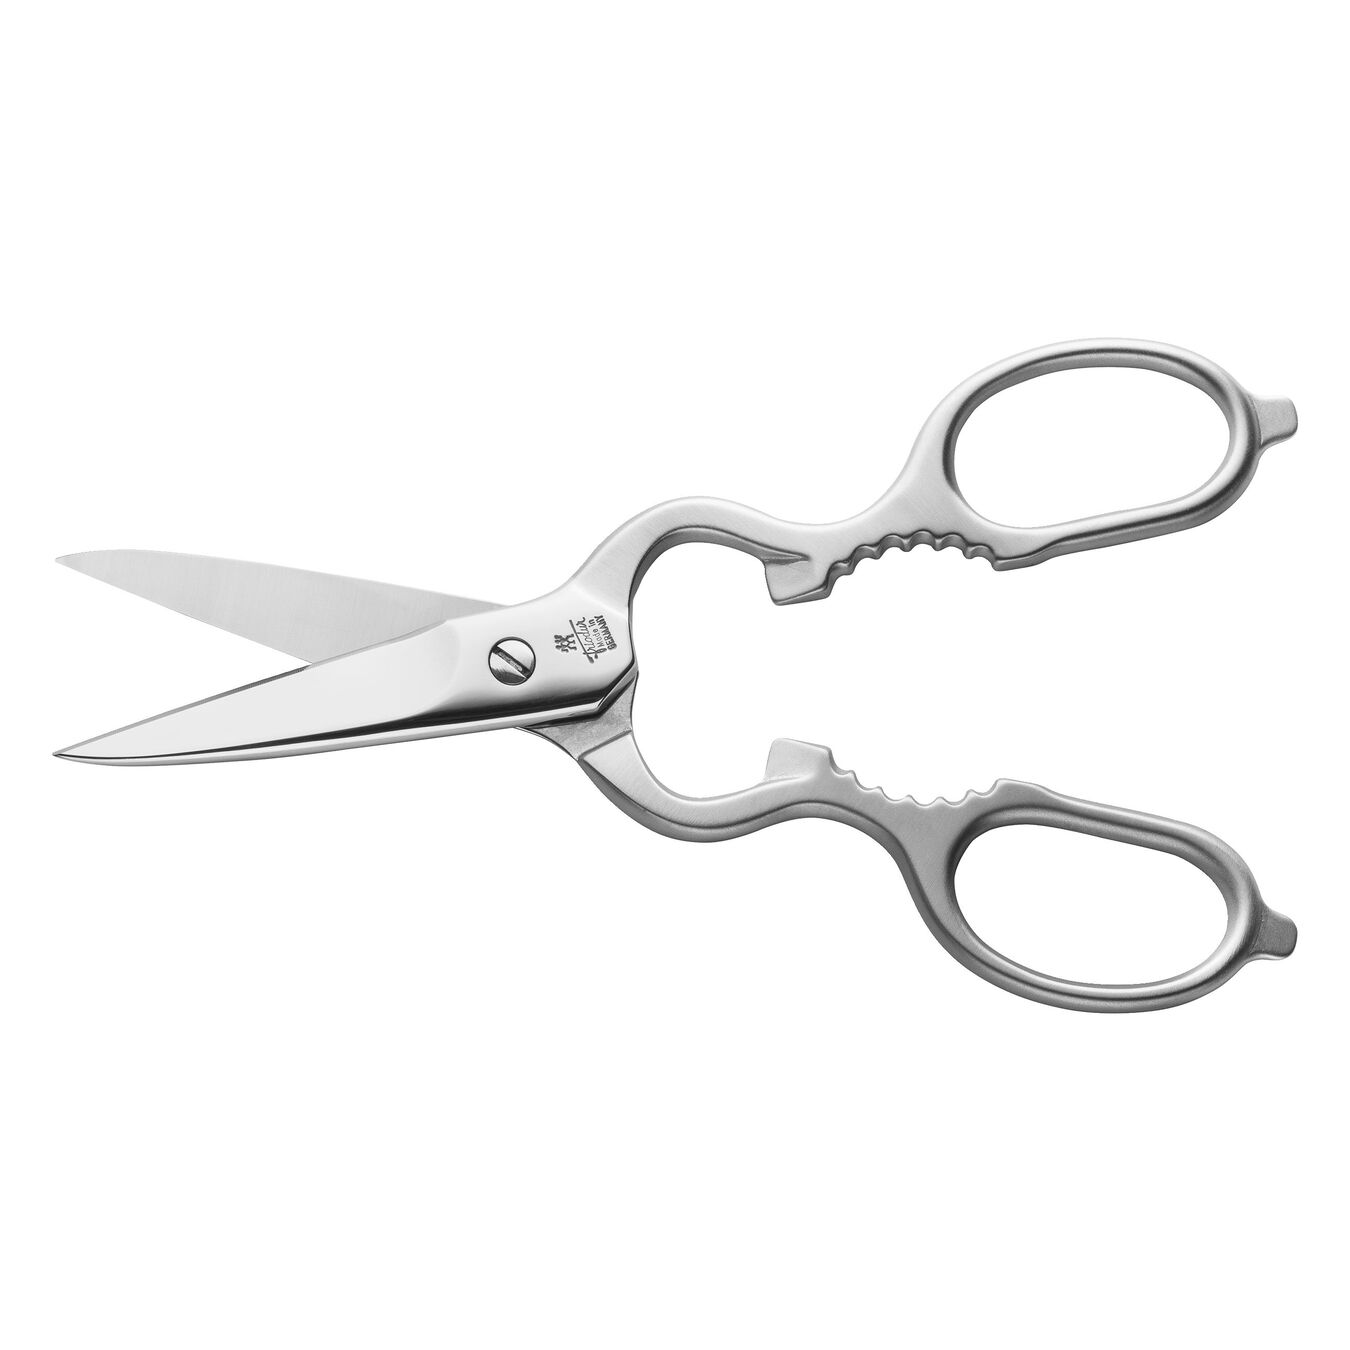 Stainless steel Multi-purpose shears silver,,large 4